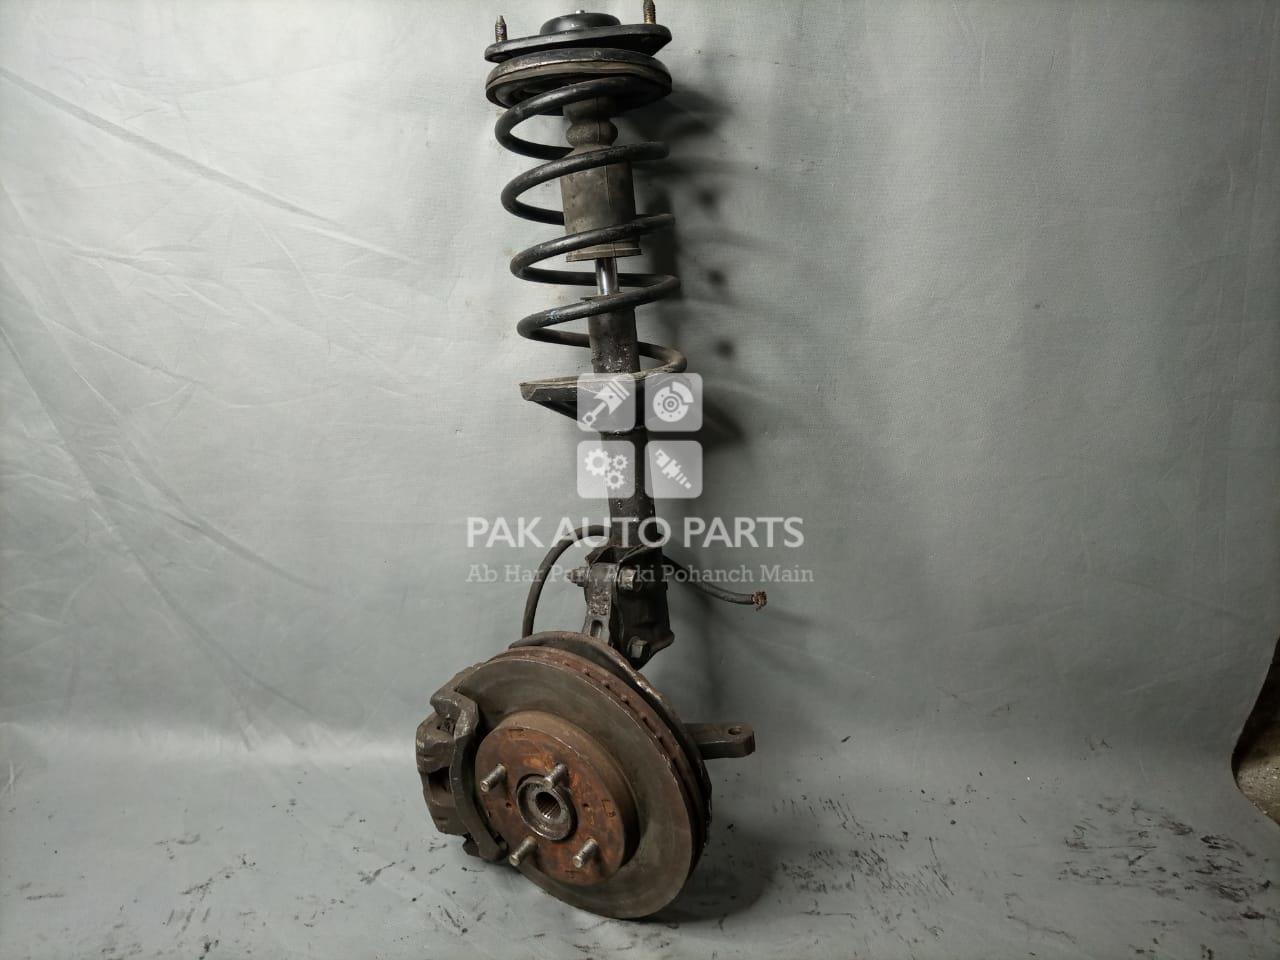 Picture of Mitsubishi Lancer 2005-20 Complete Shock